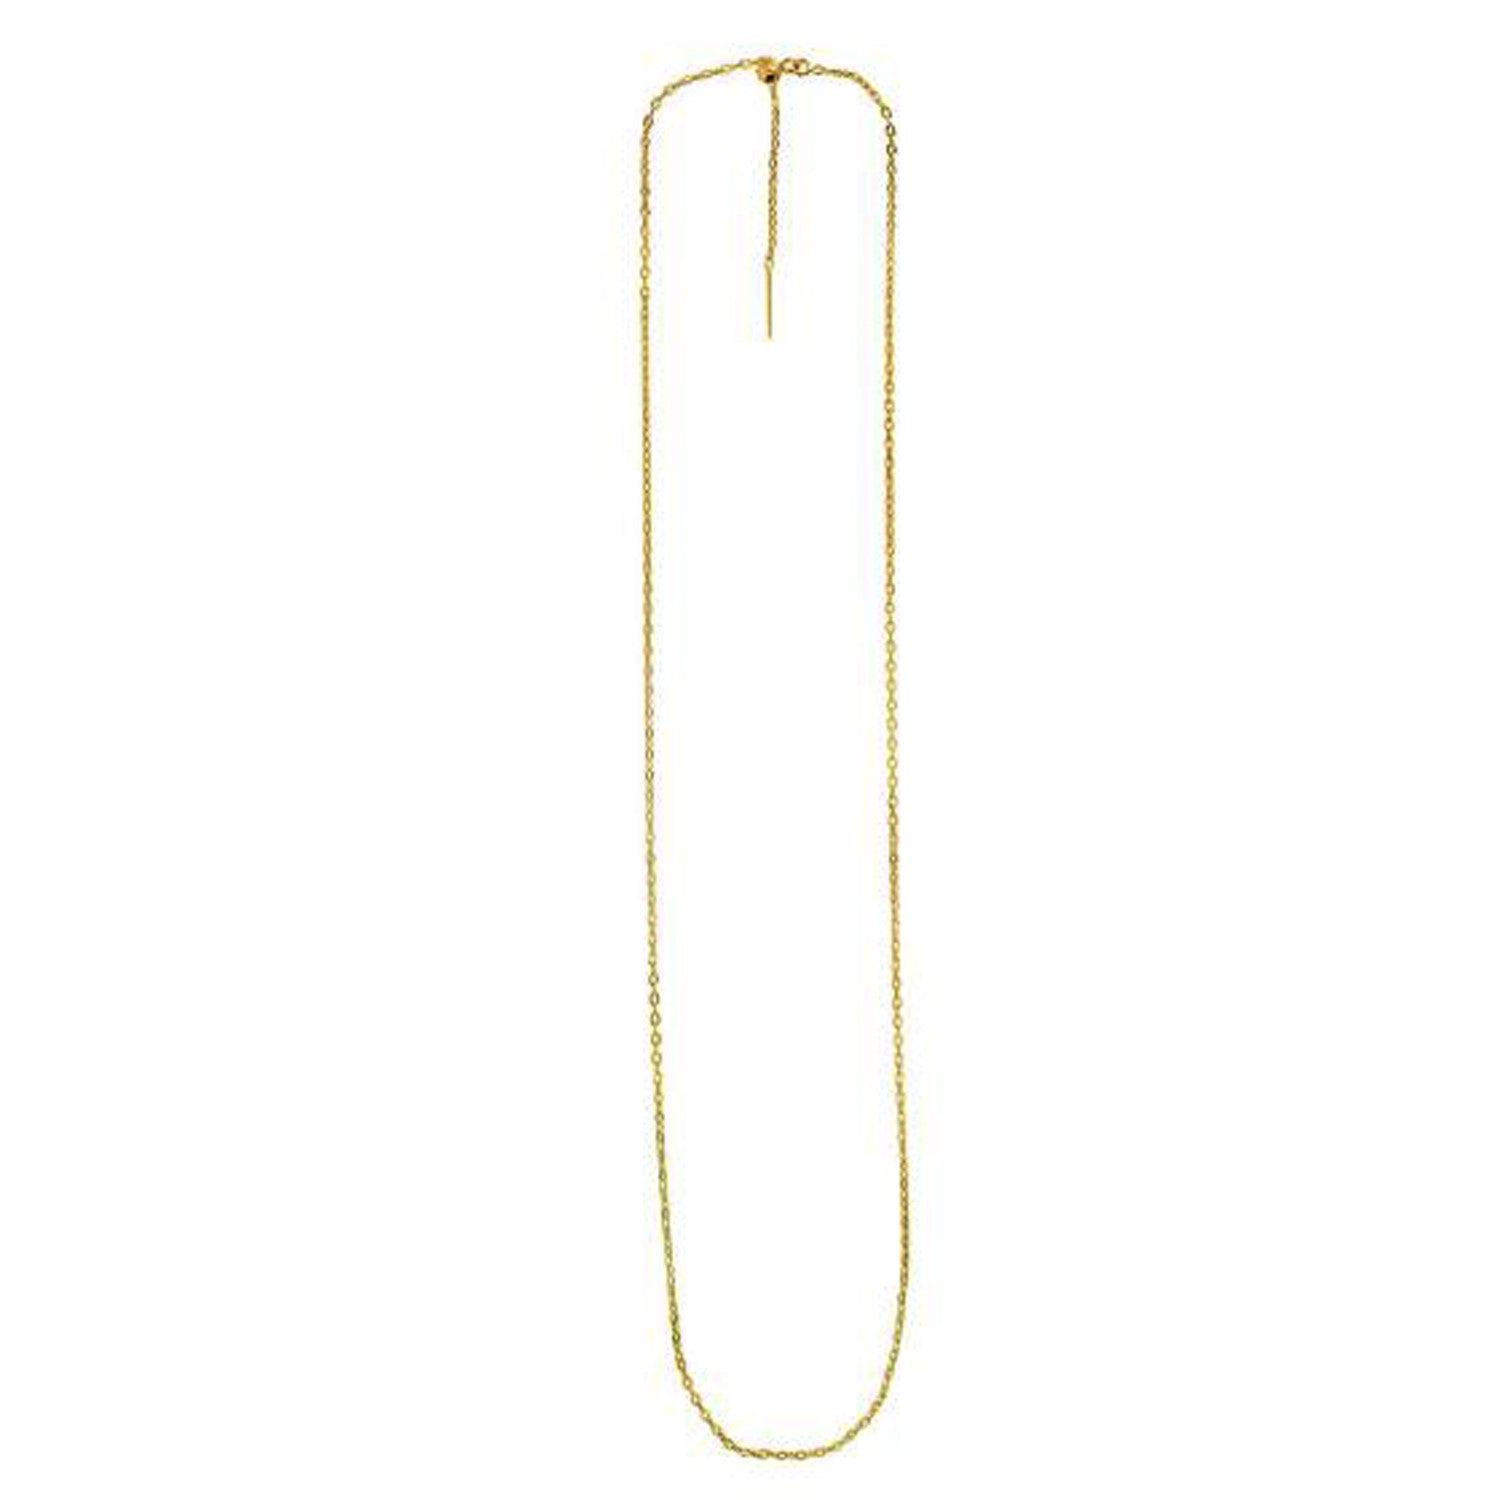 Endless Adjustable Cable Chain in 14k Yellow Gold (1.7mm)